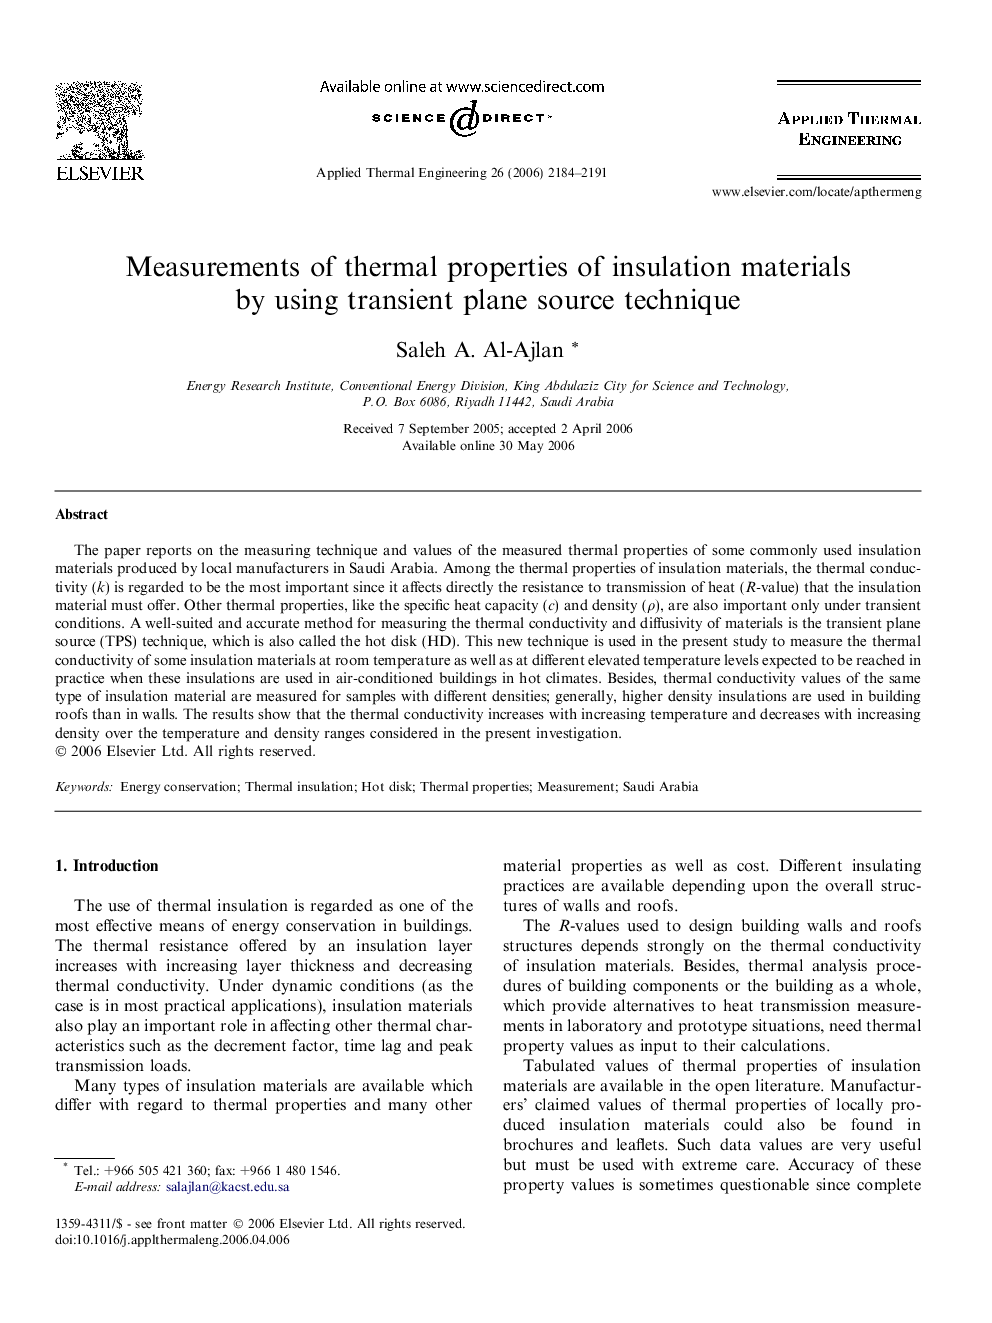 Measurements of thermal properties of insulation materials by using transient plane source technique